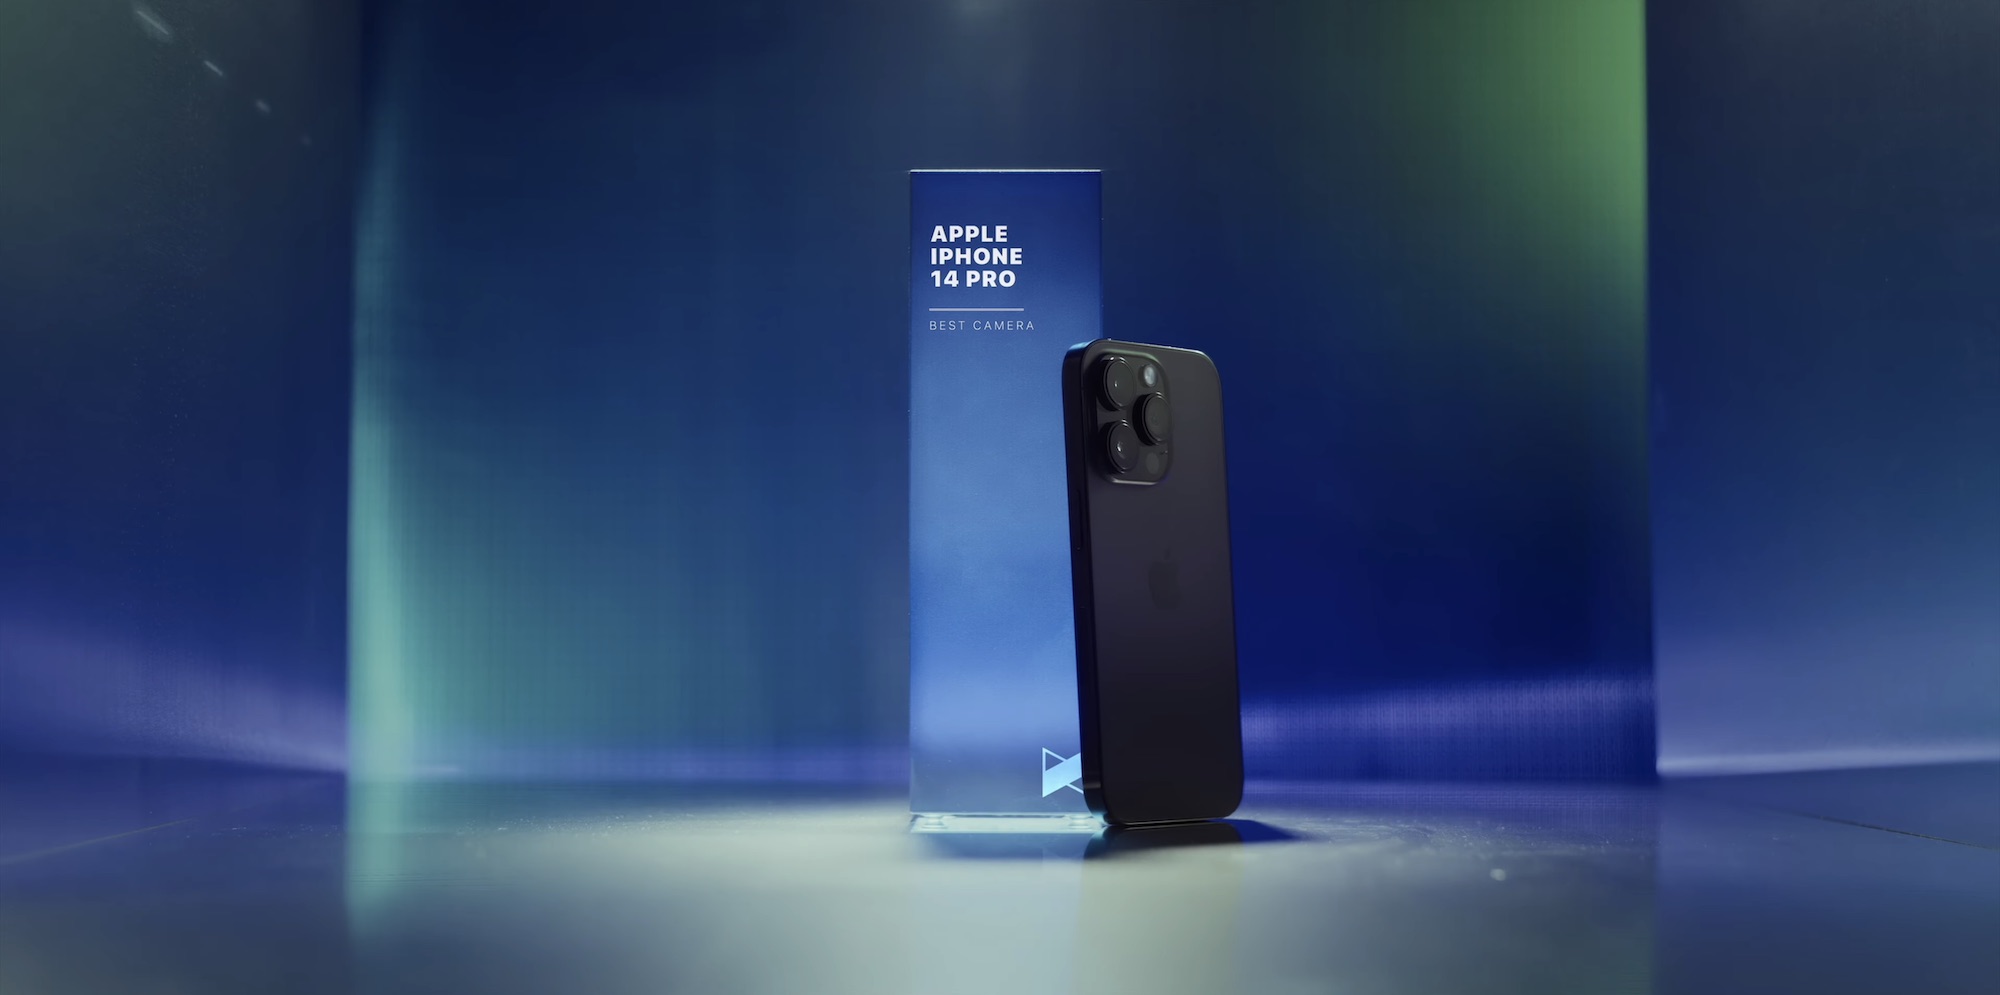 MKBHD’s Smartphone Awards picks one of the best telephones of 2022